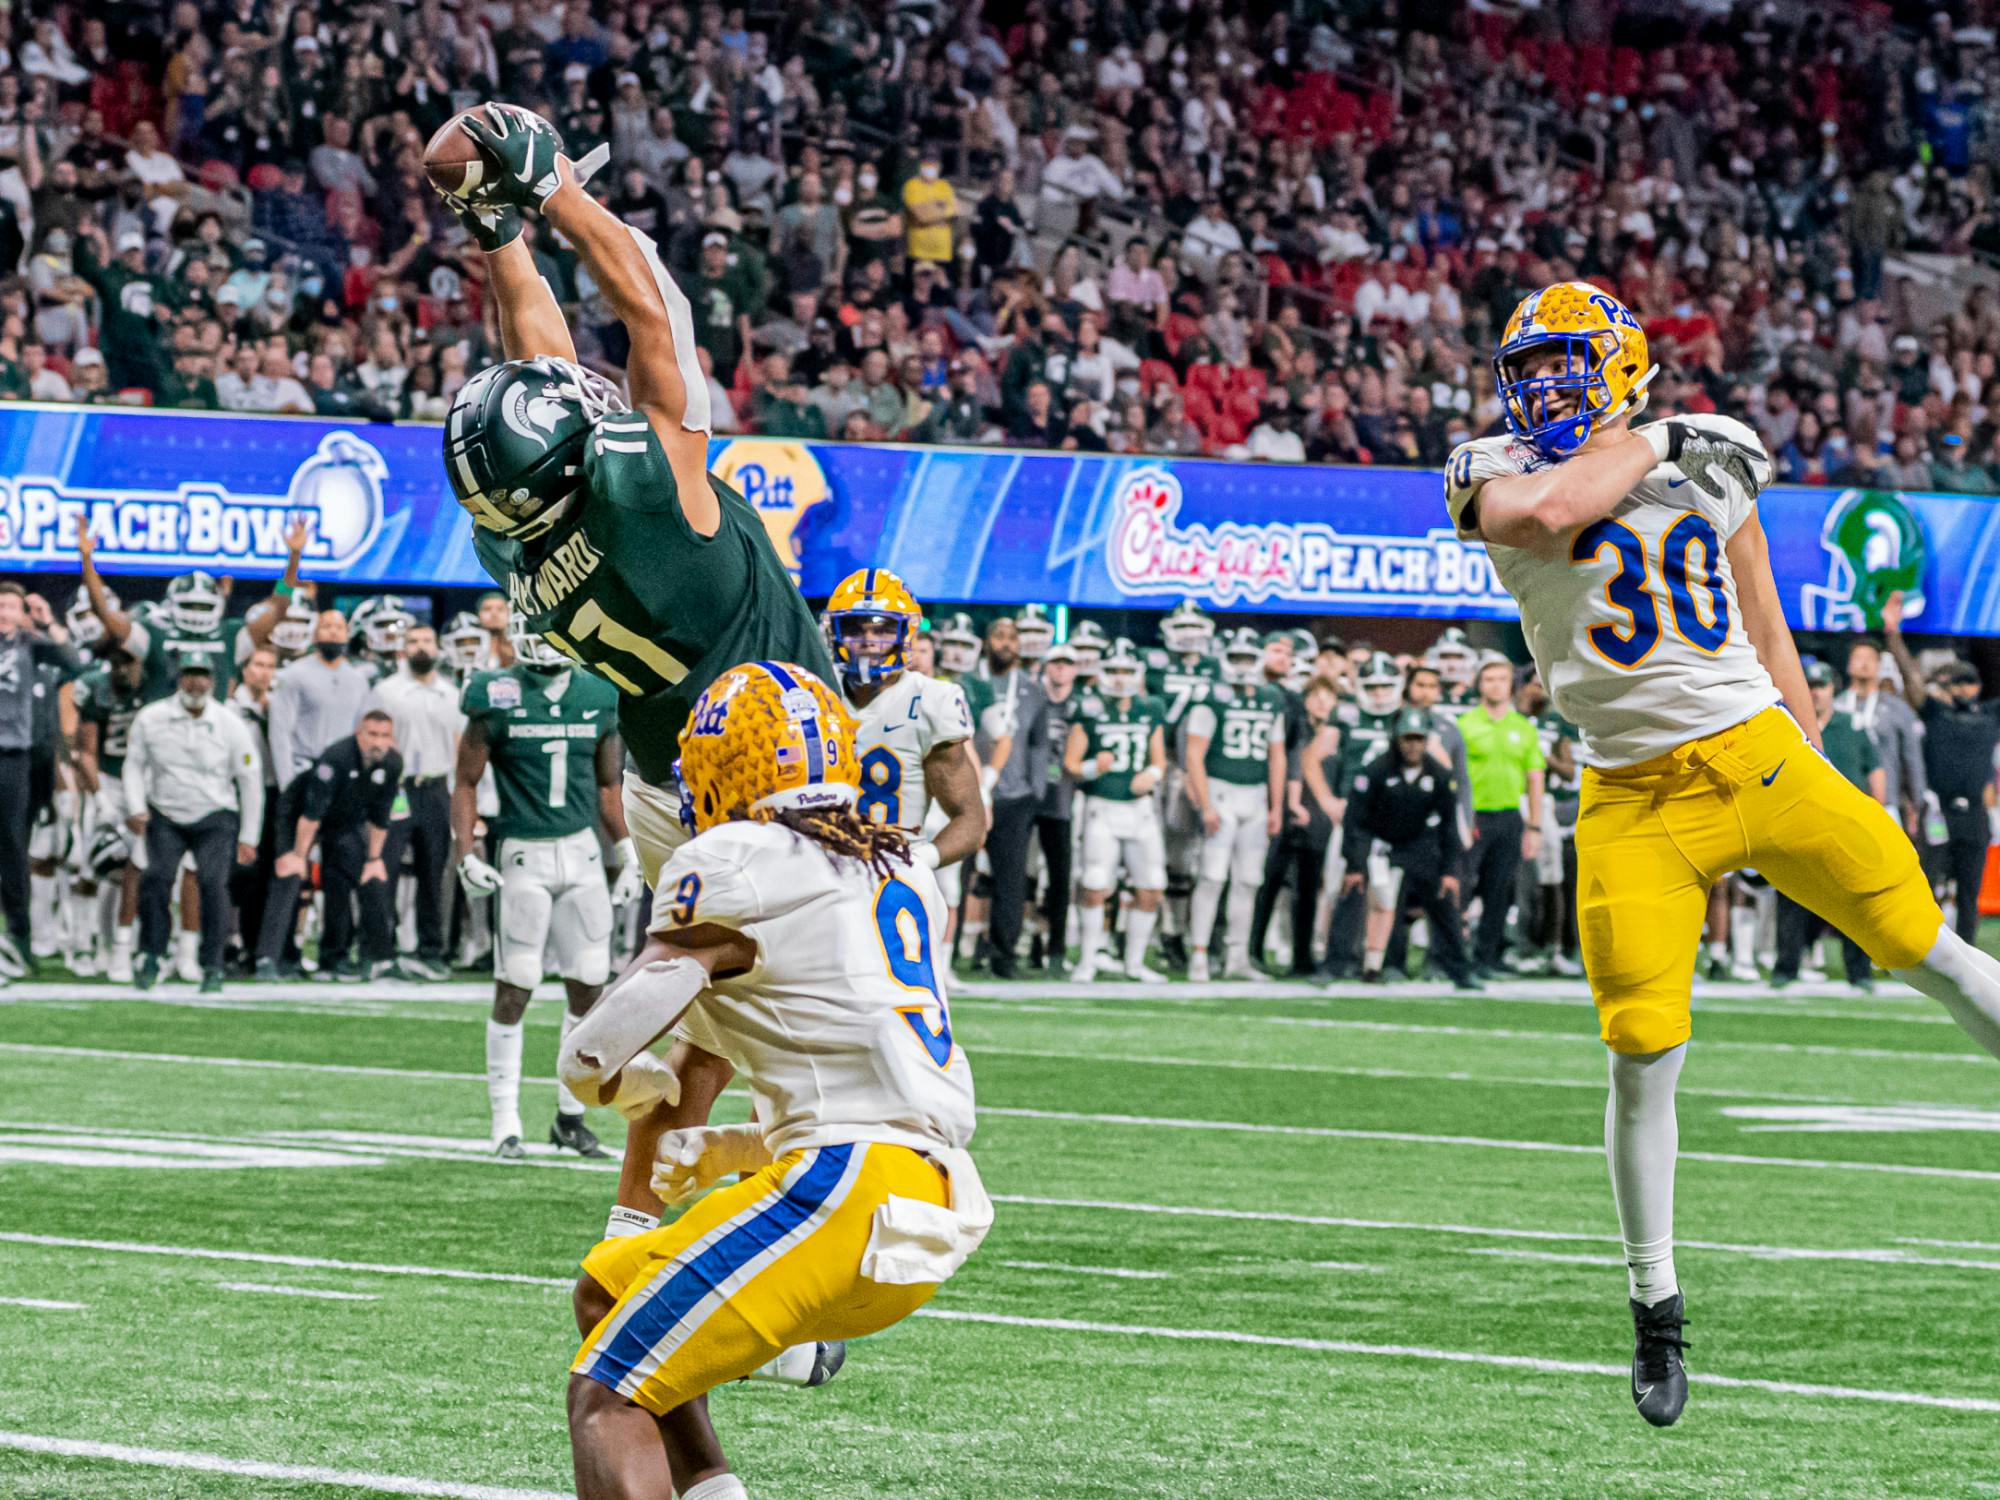 <p>Redshirt senior tight end Connor Hayward hauls in a touchdown midway through the fourth quarter during the Spartans 31-21 victory against Pitt in the Chick-Fil-A Peach Bowl on Dec. 30, 2021.</p>